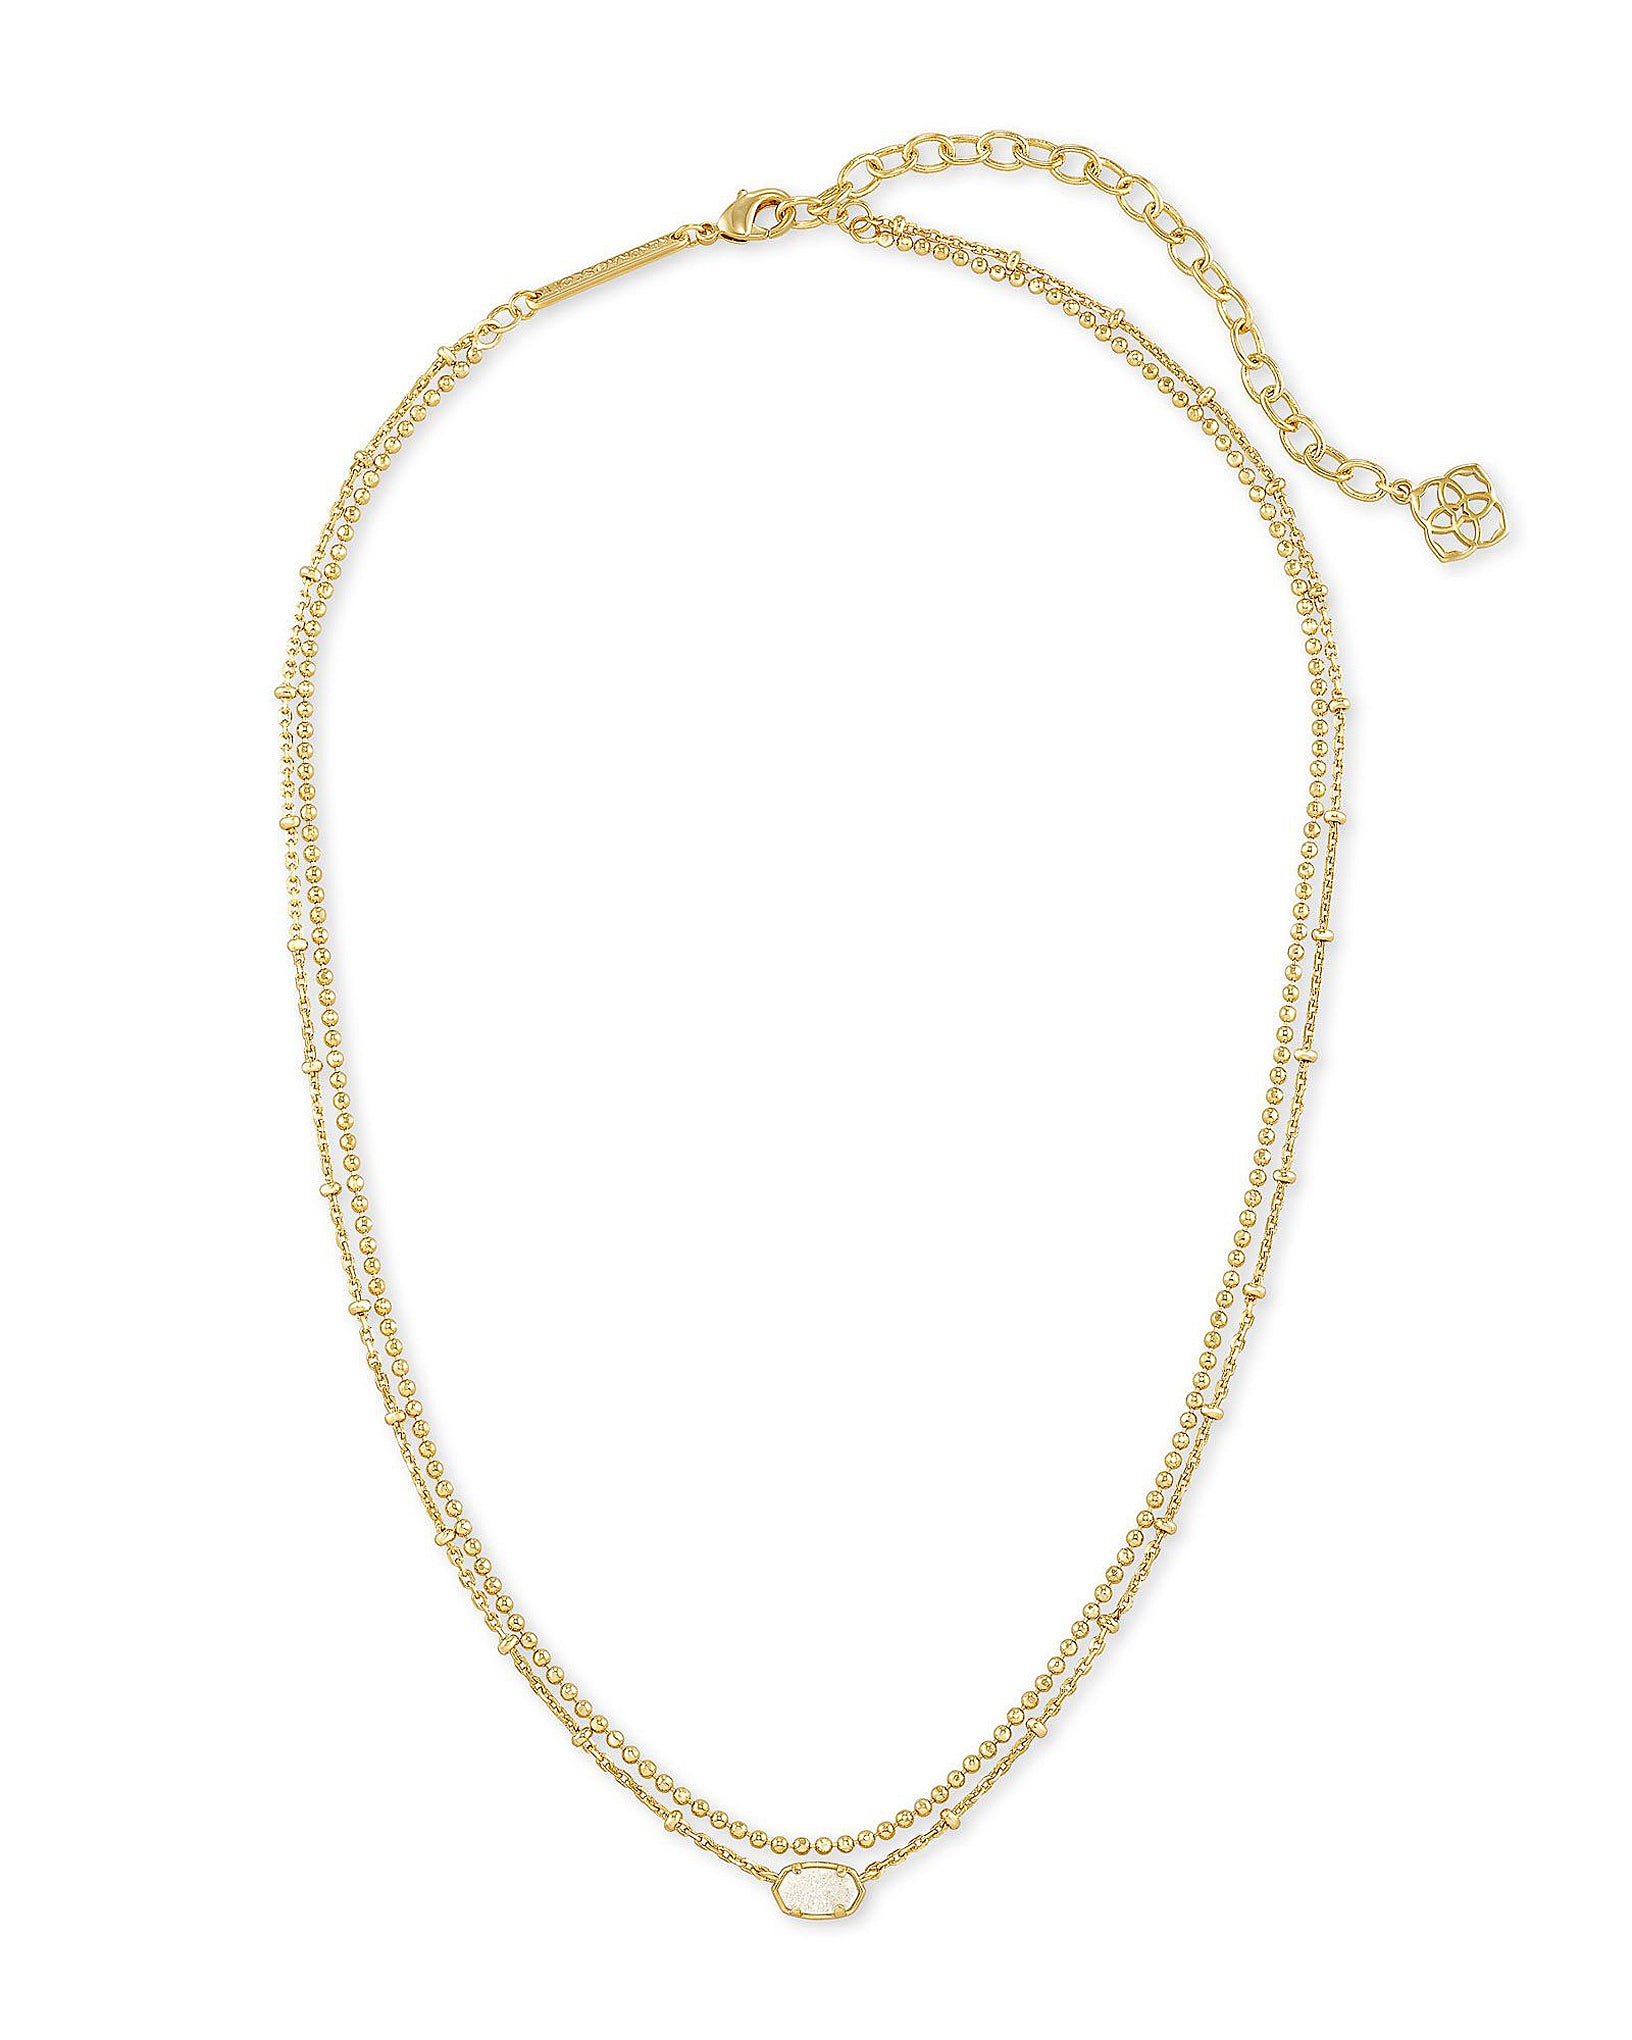 Kendra Scott Emilie Oval Multi Strand Necklace in Iridescent Drusy and Gold